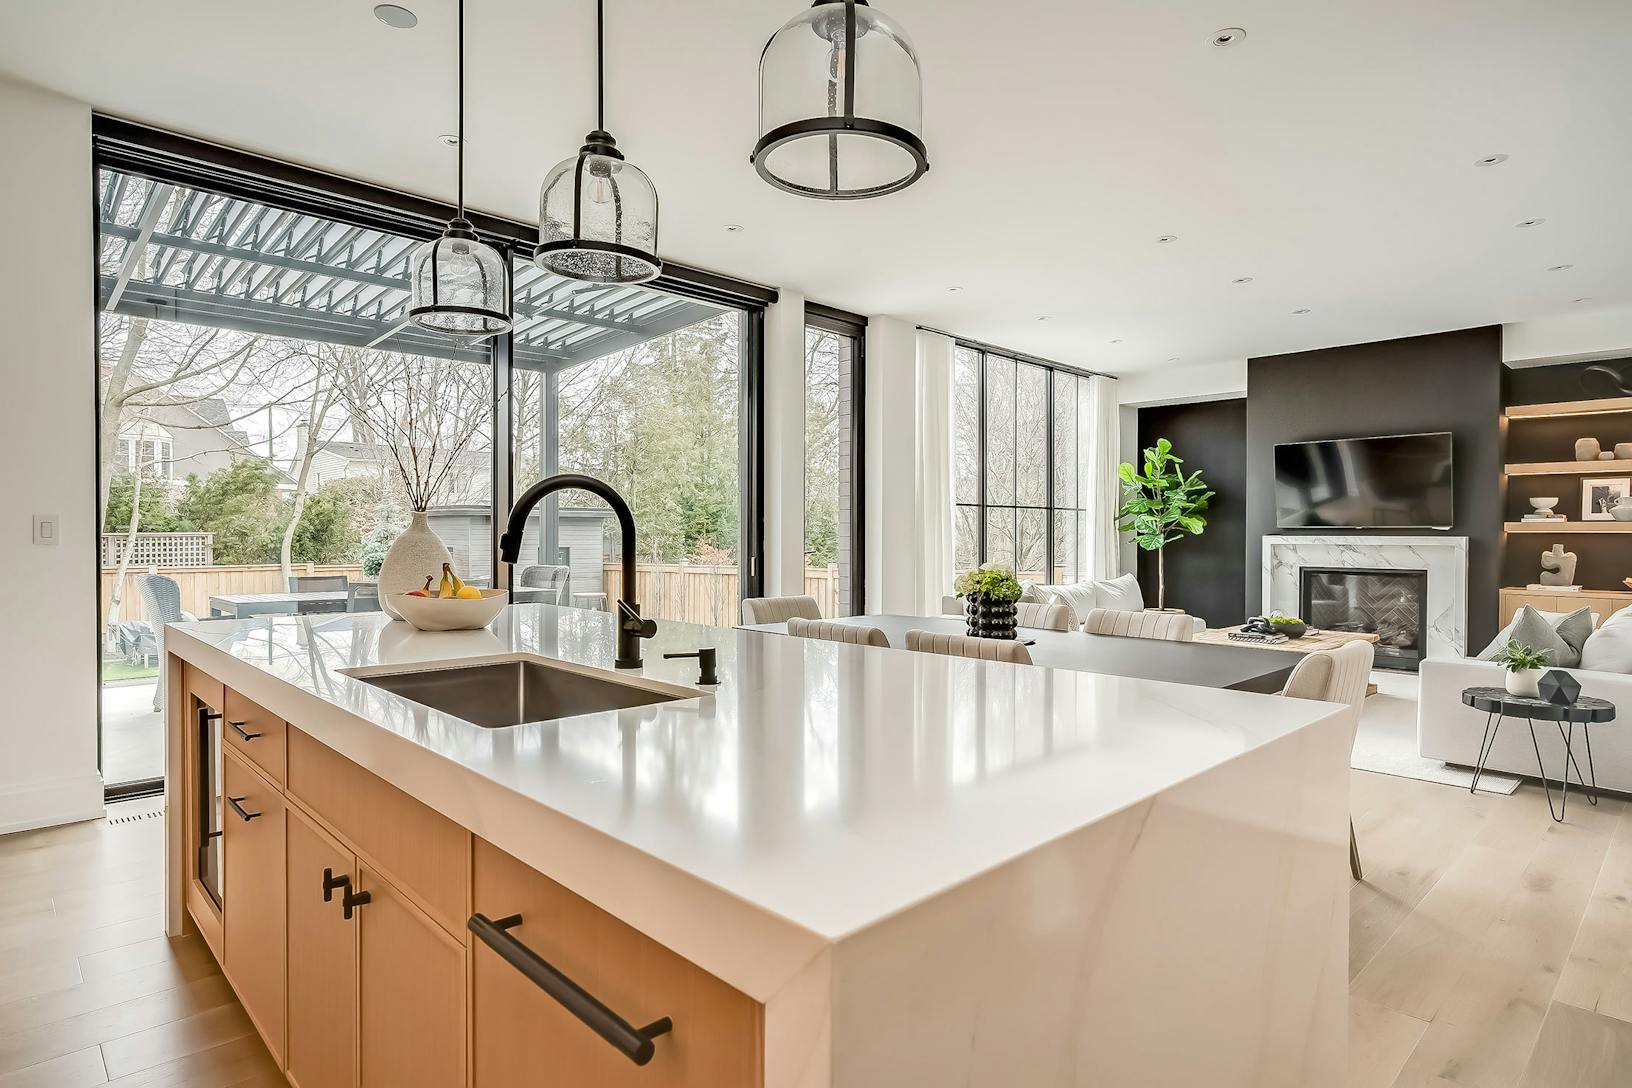 A modern kitchen with white counter tops and stainless steel appliances featuring minimal sliding glass walls